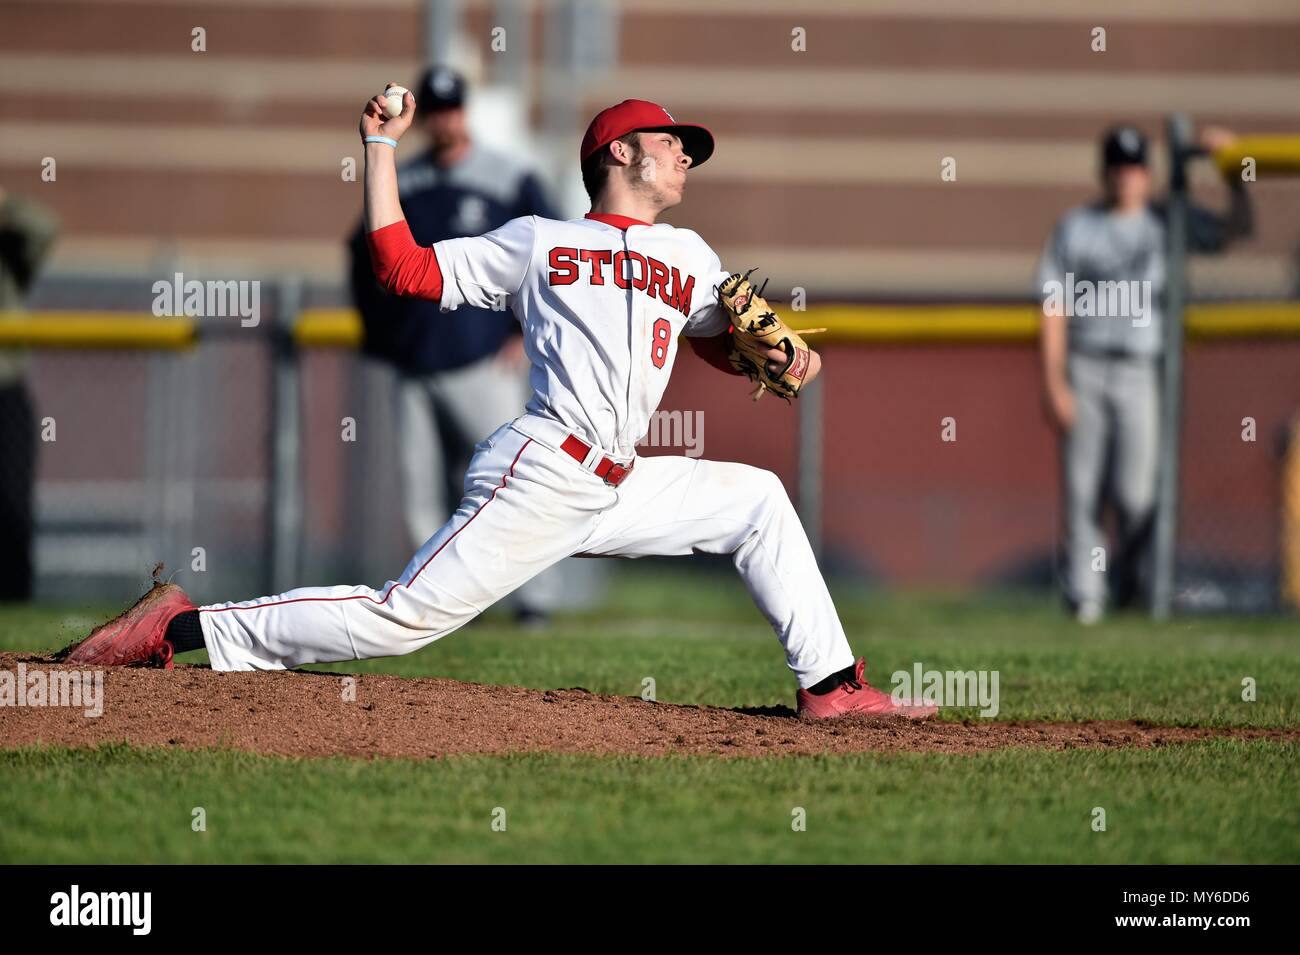 Right-handed pitcher throwing to an opposing hitter during a high school baseball game. USA. Stock Photo